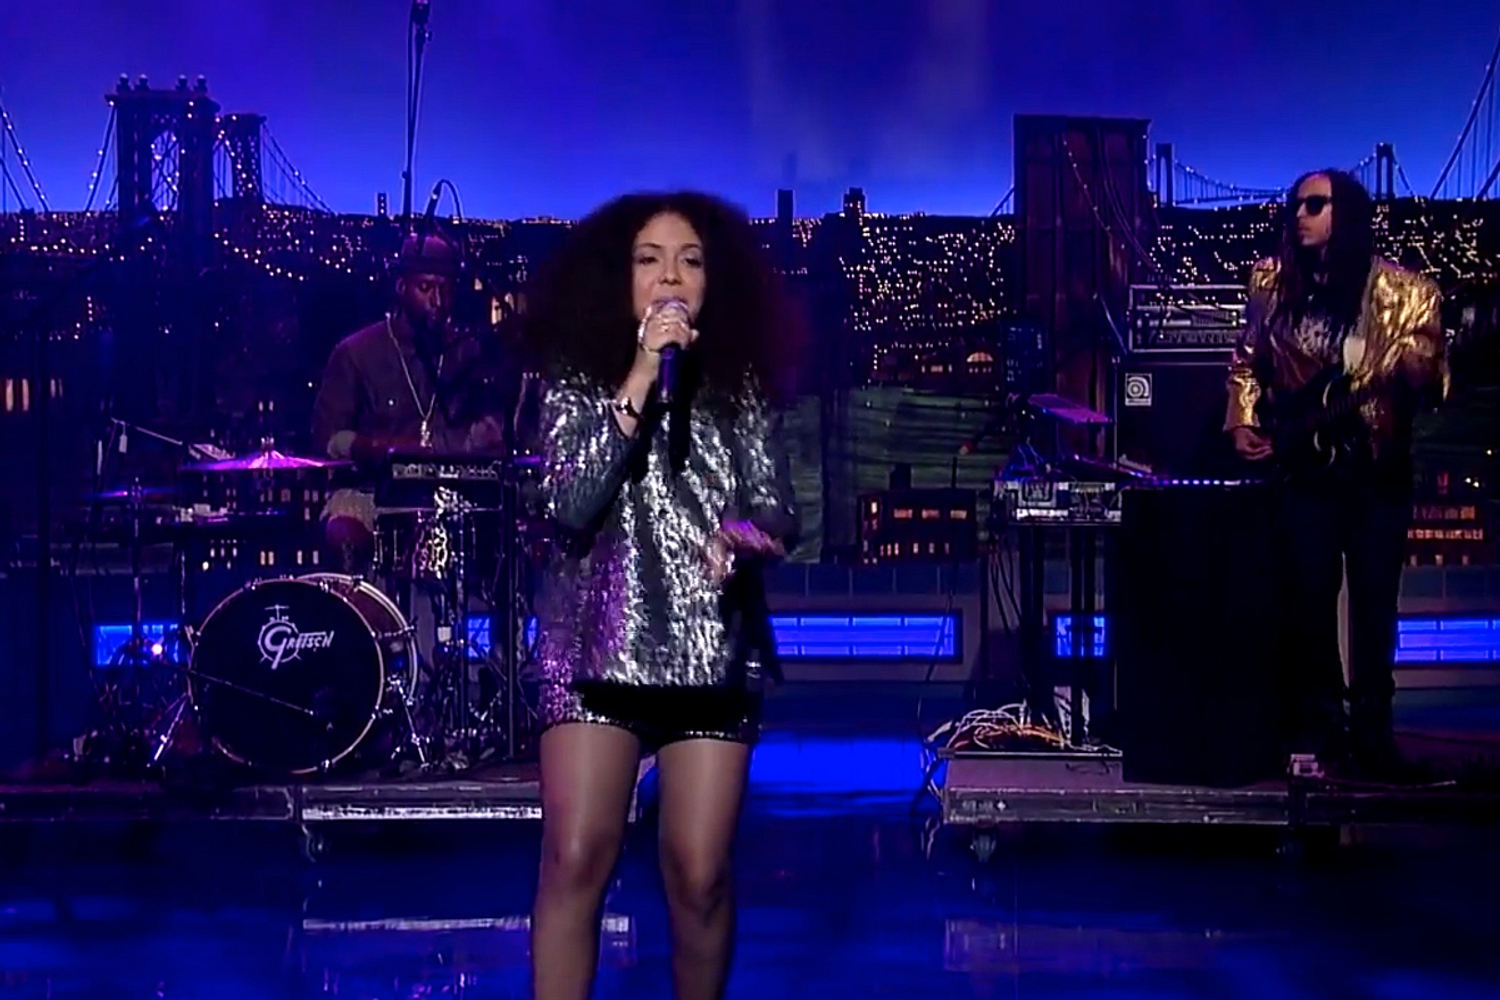 Watch Mapei make US TV debut with ‘Don’t Wait’ on Letterman